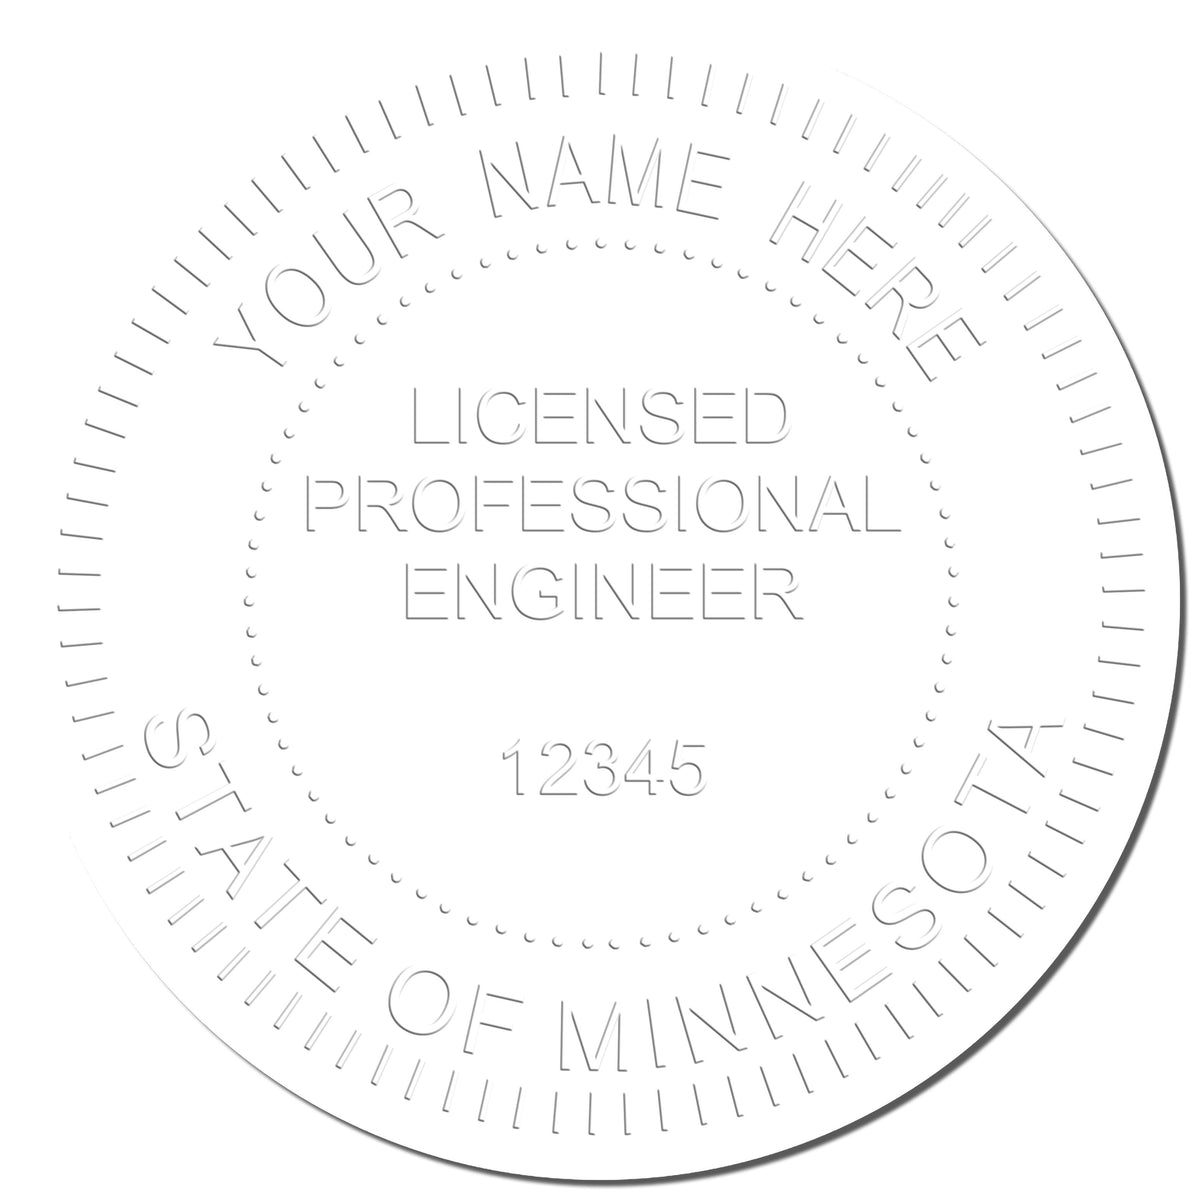 This paper is stamped with a sample imprint of the Heavy Duty Cast Iron Minnesota Engineer Seal Embosser, signifying its quality and reliability.